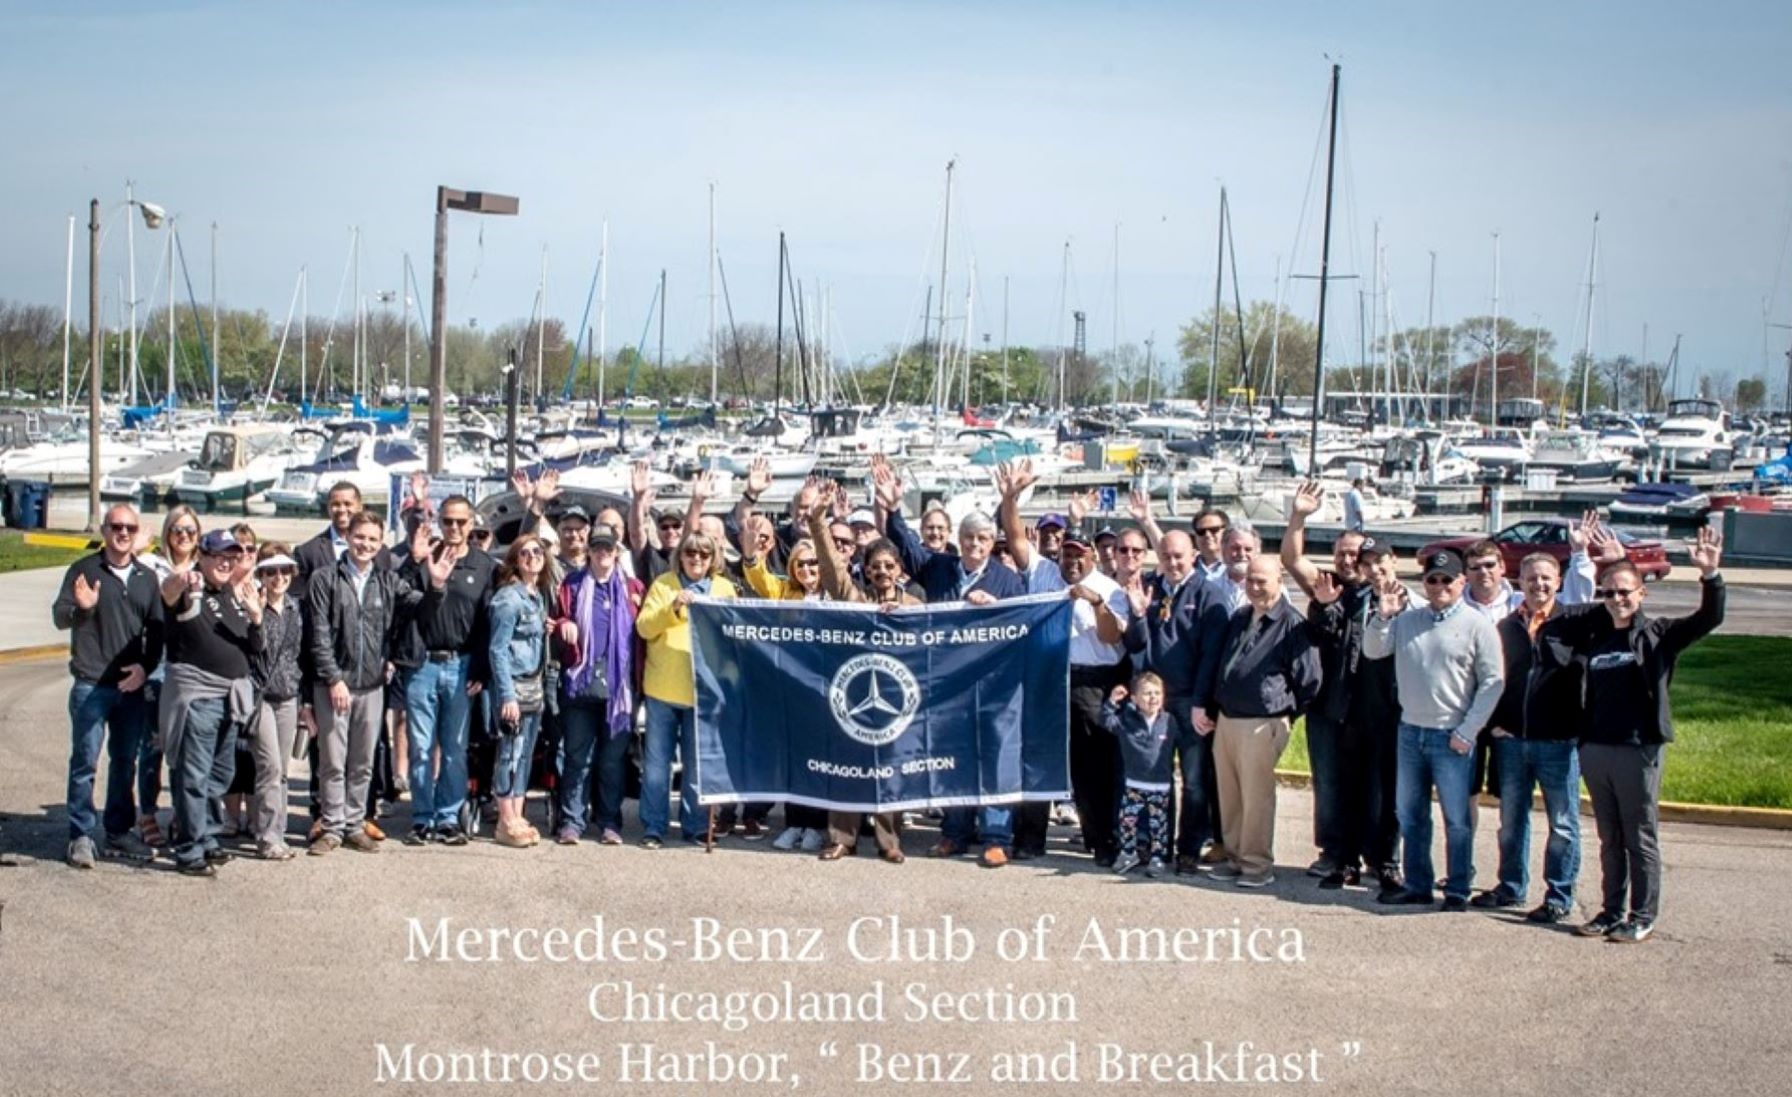 Annual Benz & Breakfast get together at Montrose Harbor ion Chicago lakefront